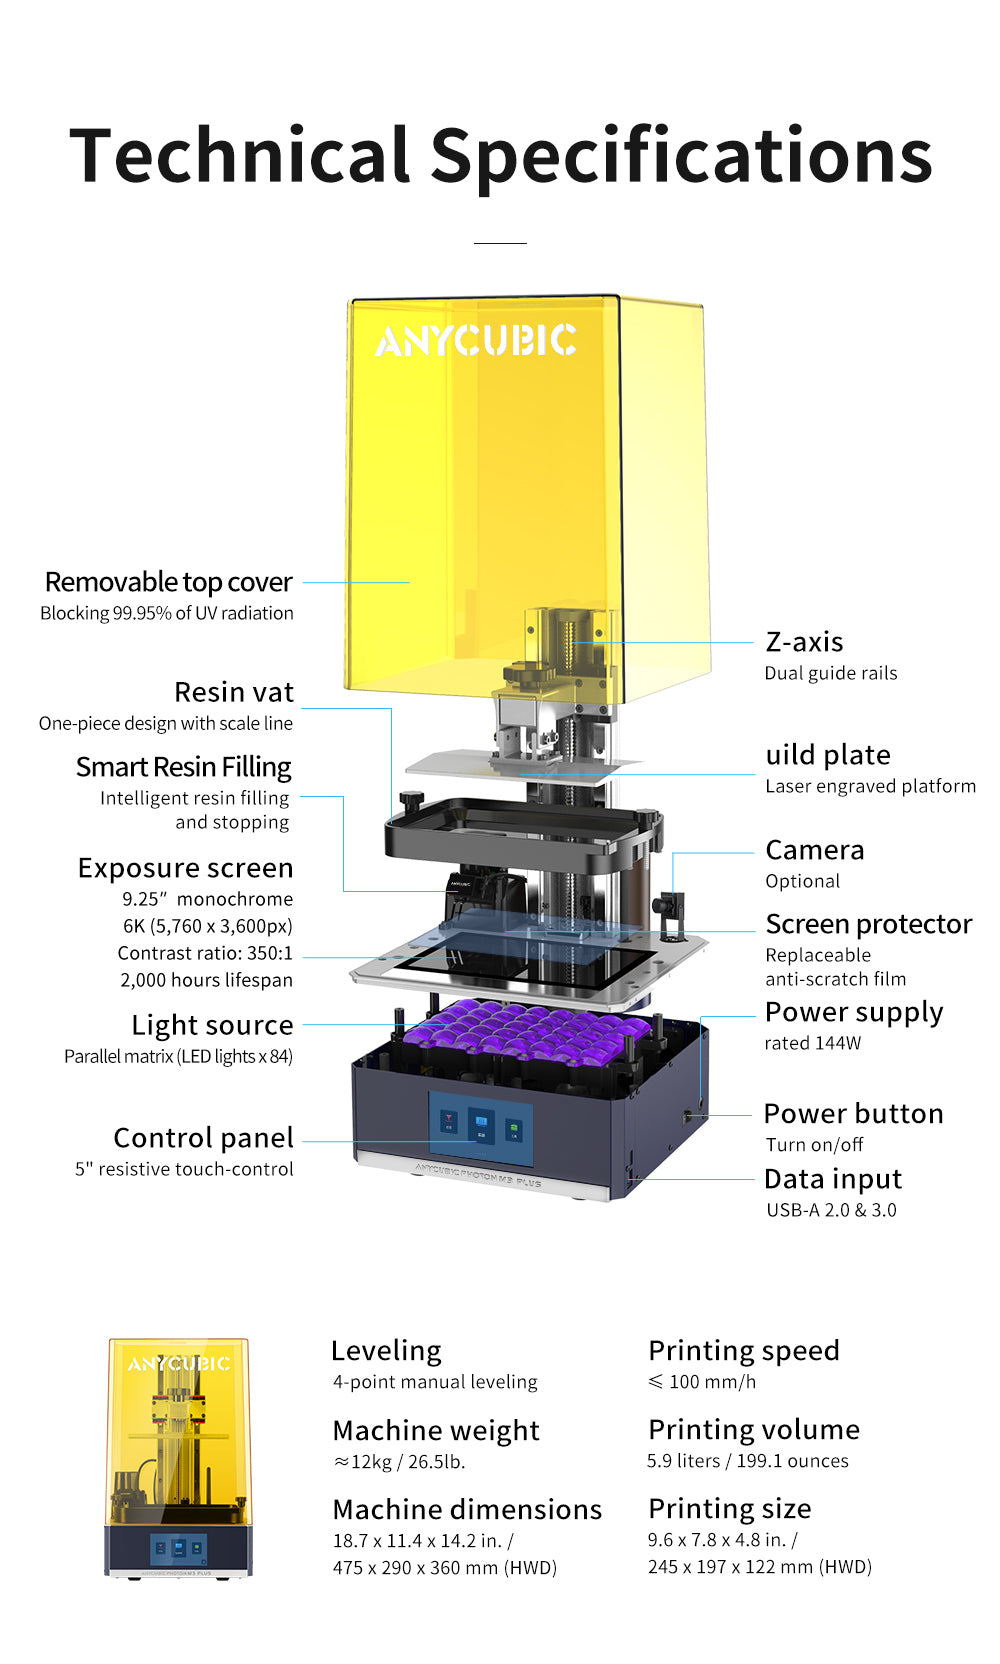 Anycubic Photon M3 Plus 3D Printer - Smart & Connected12